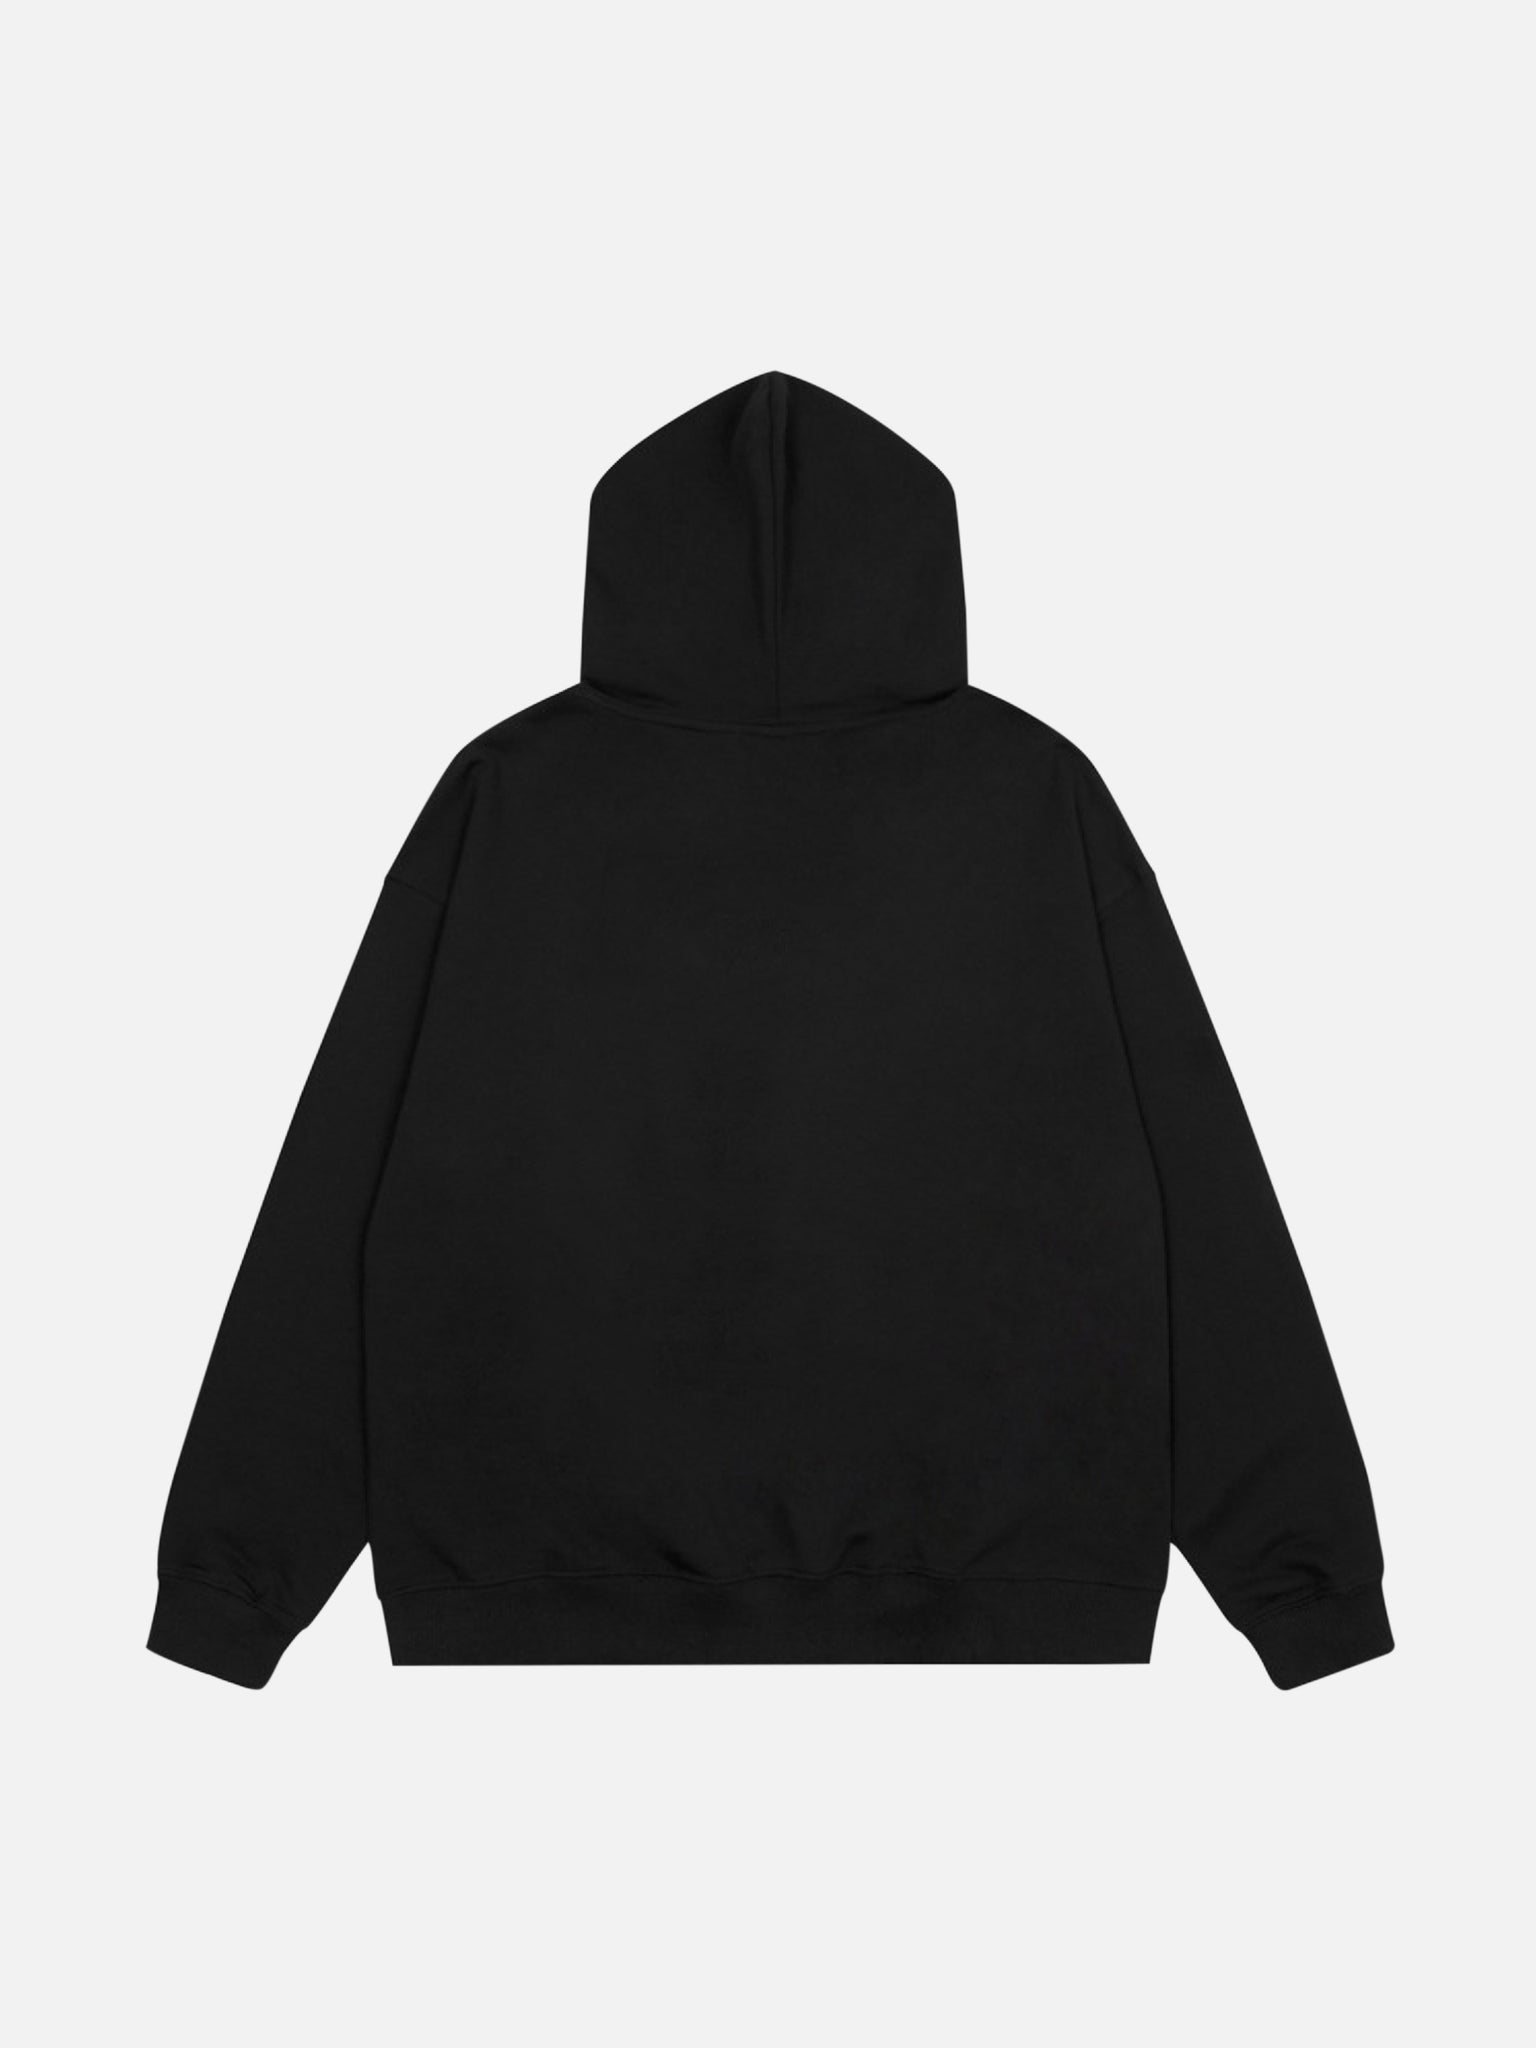 The Supermade Letter Print Hoodie